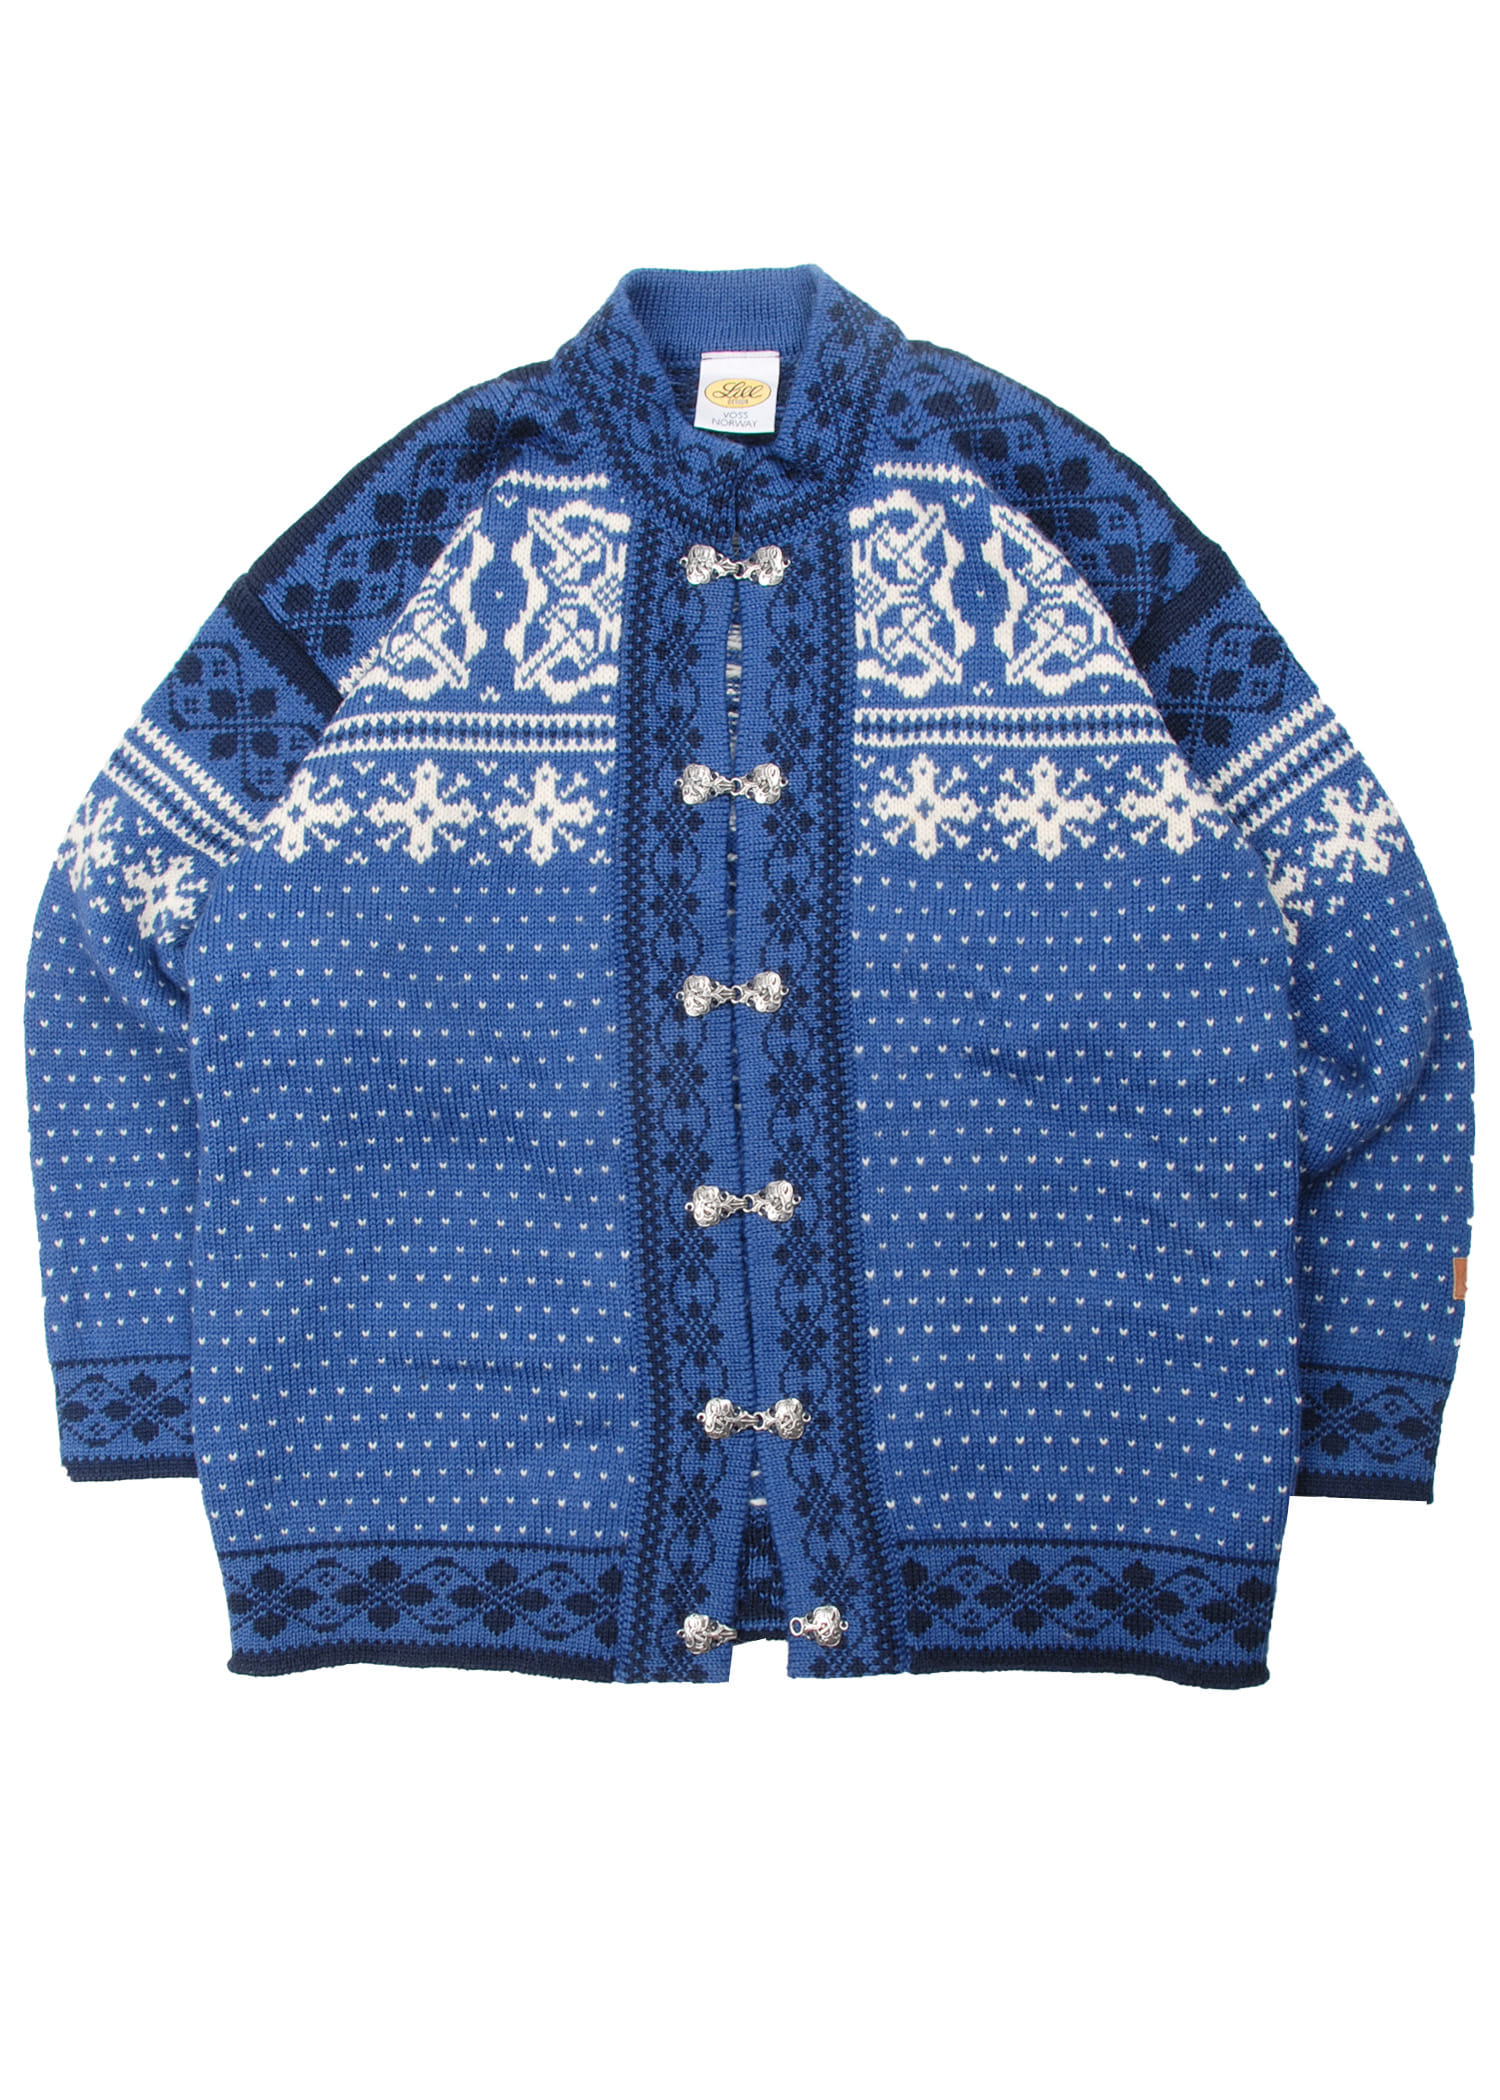 VOSS NORWAY knit jacket